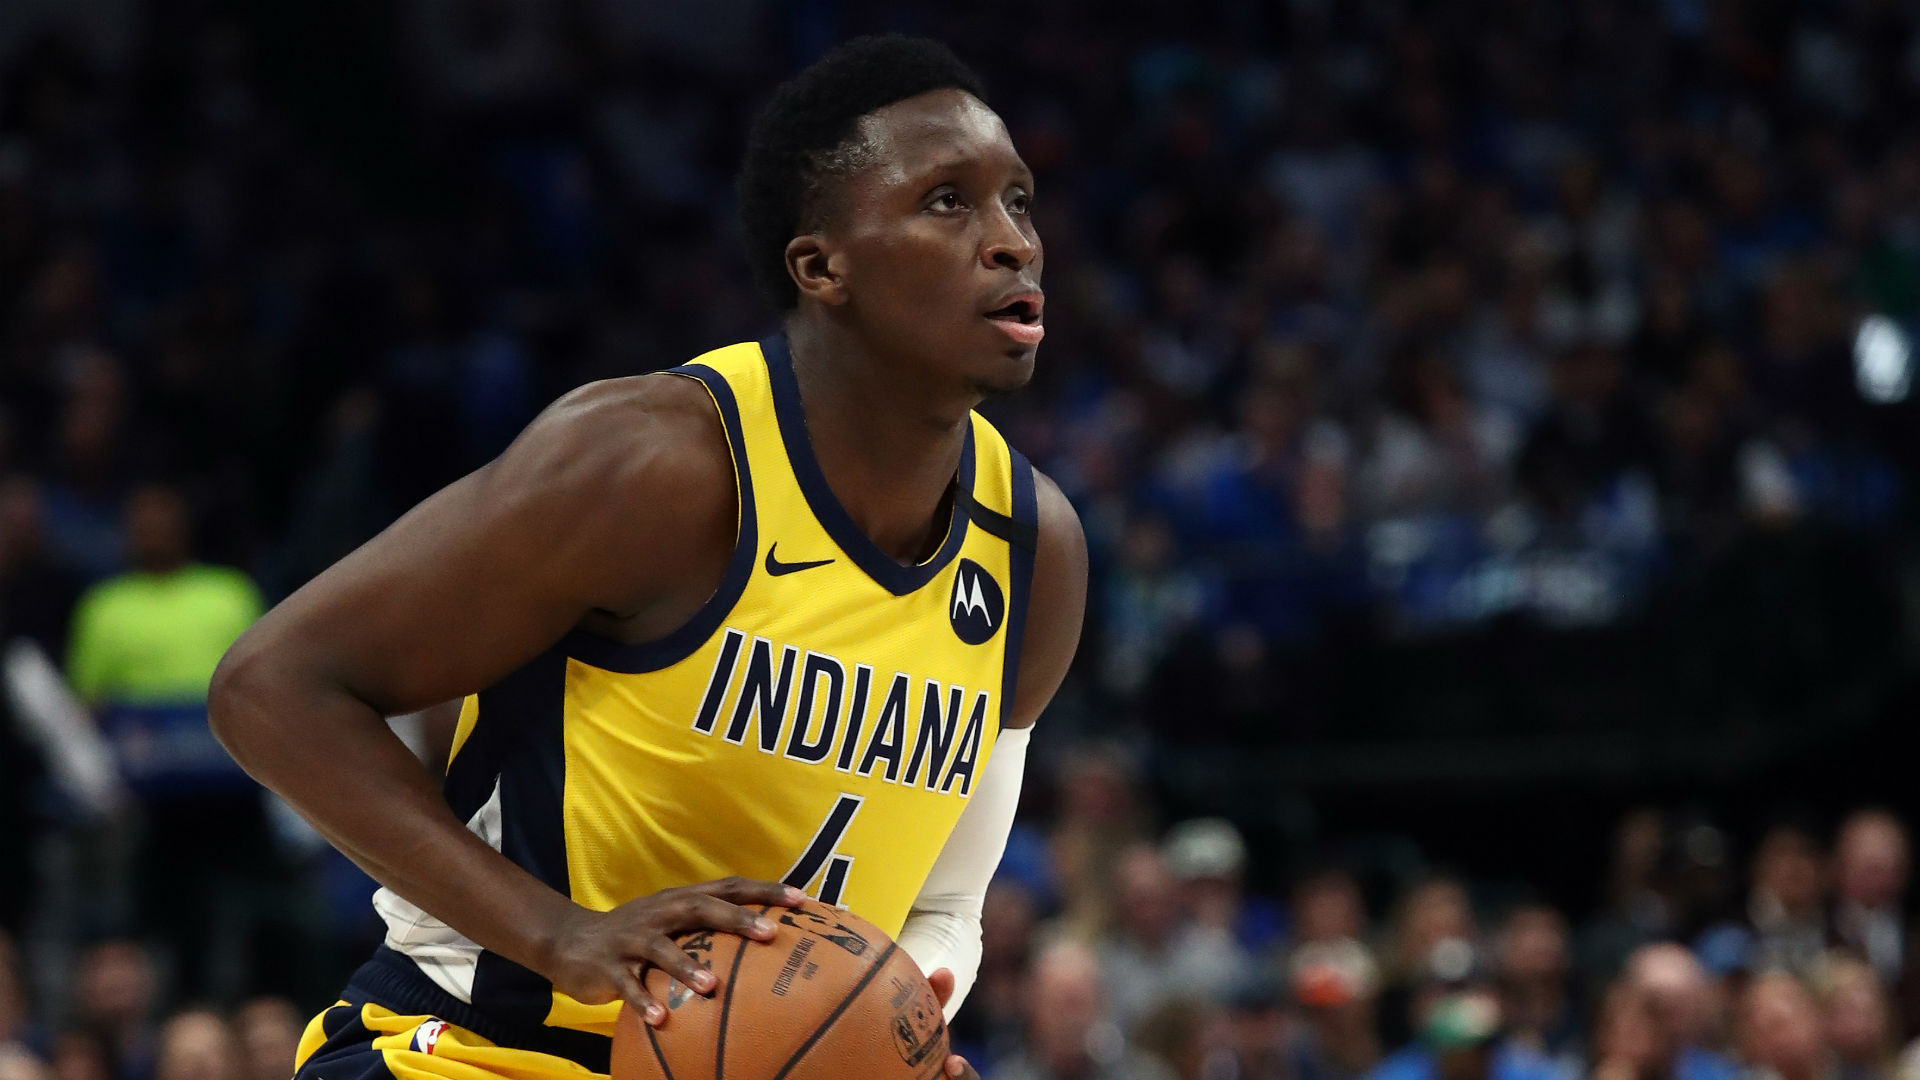 When the NBA restarts, Indiana Pacers guard Victor Oladipo will not be taking part.